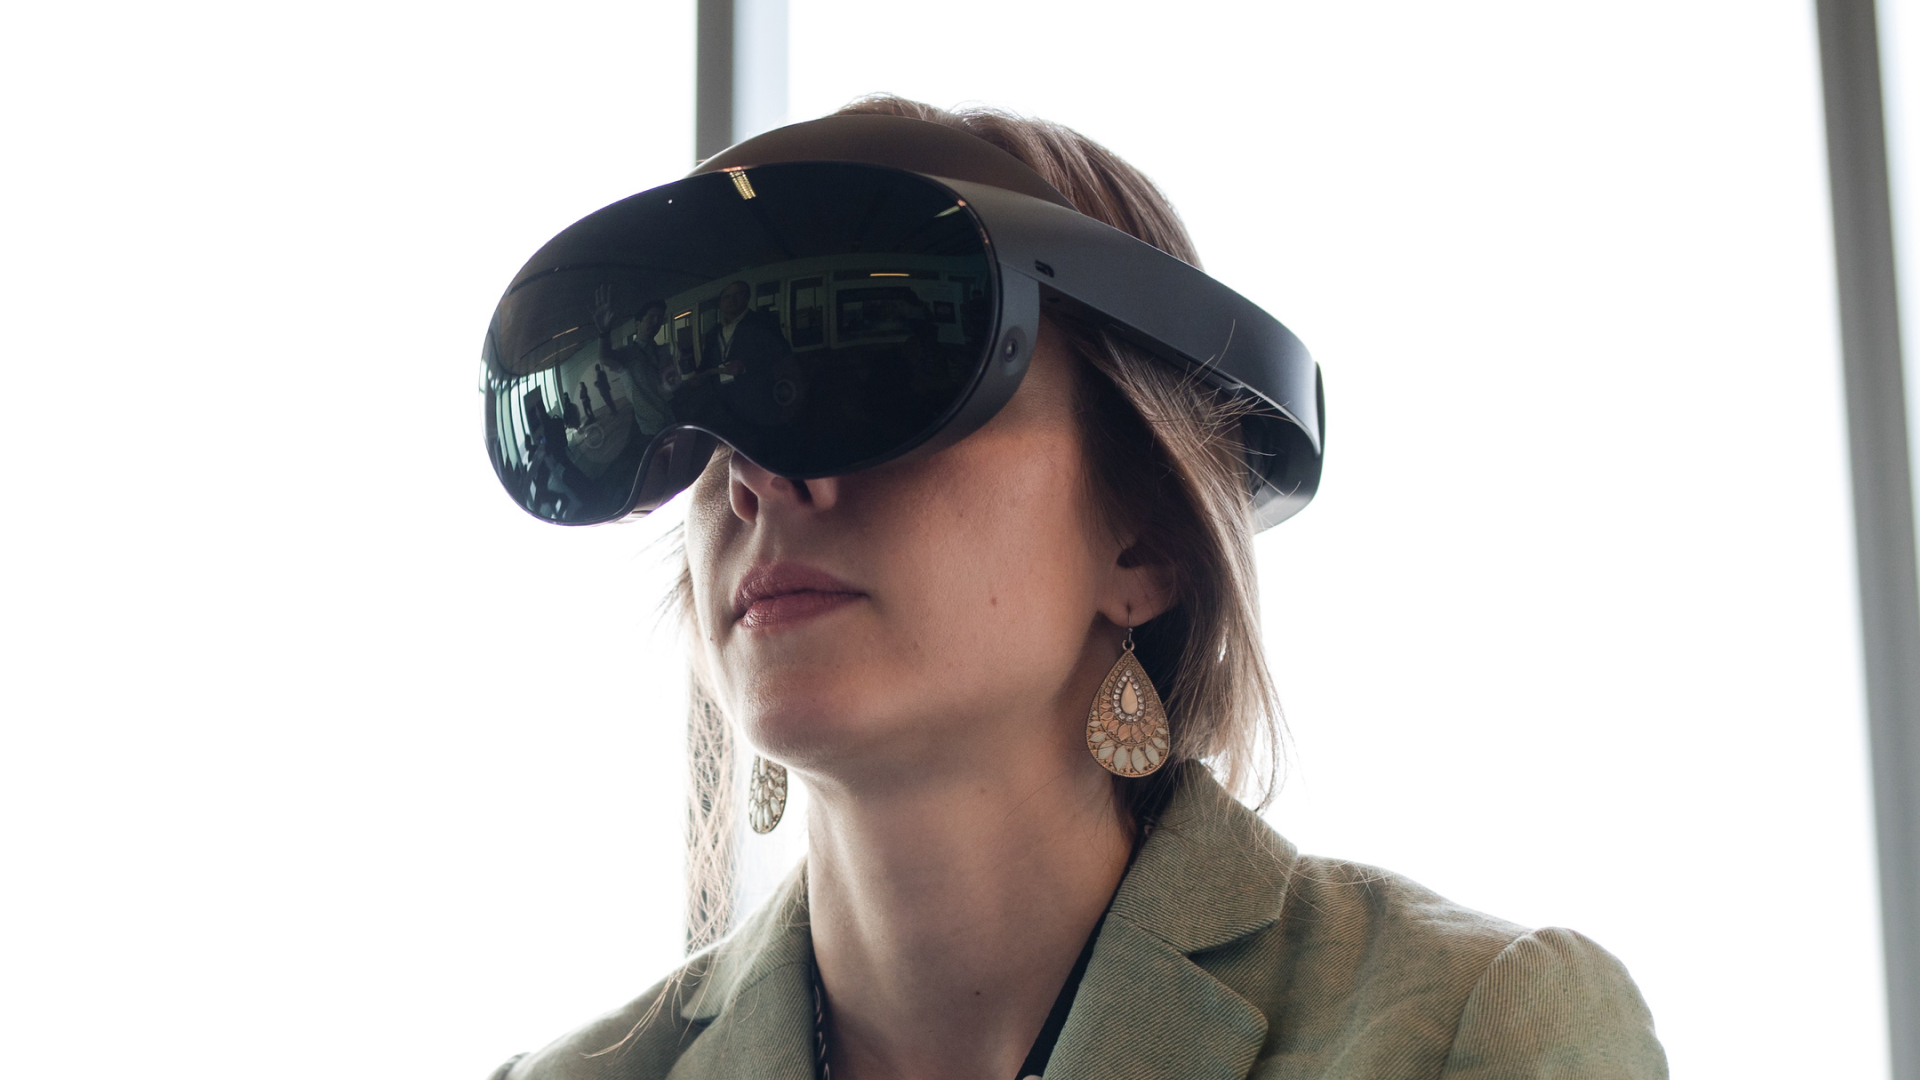 Photo of a woman using a Meta Quest VR headset